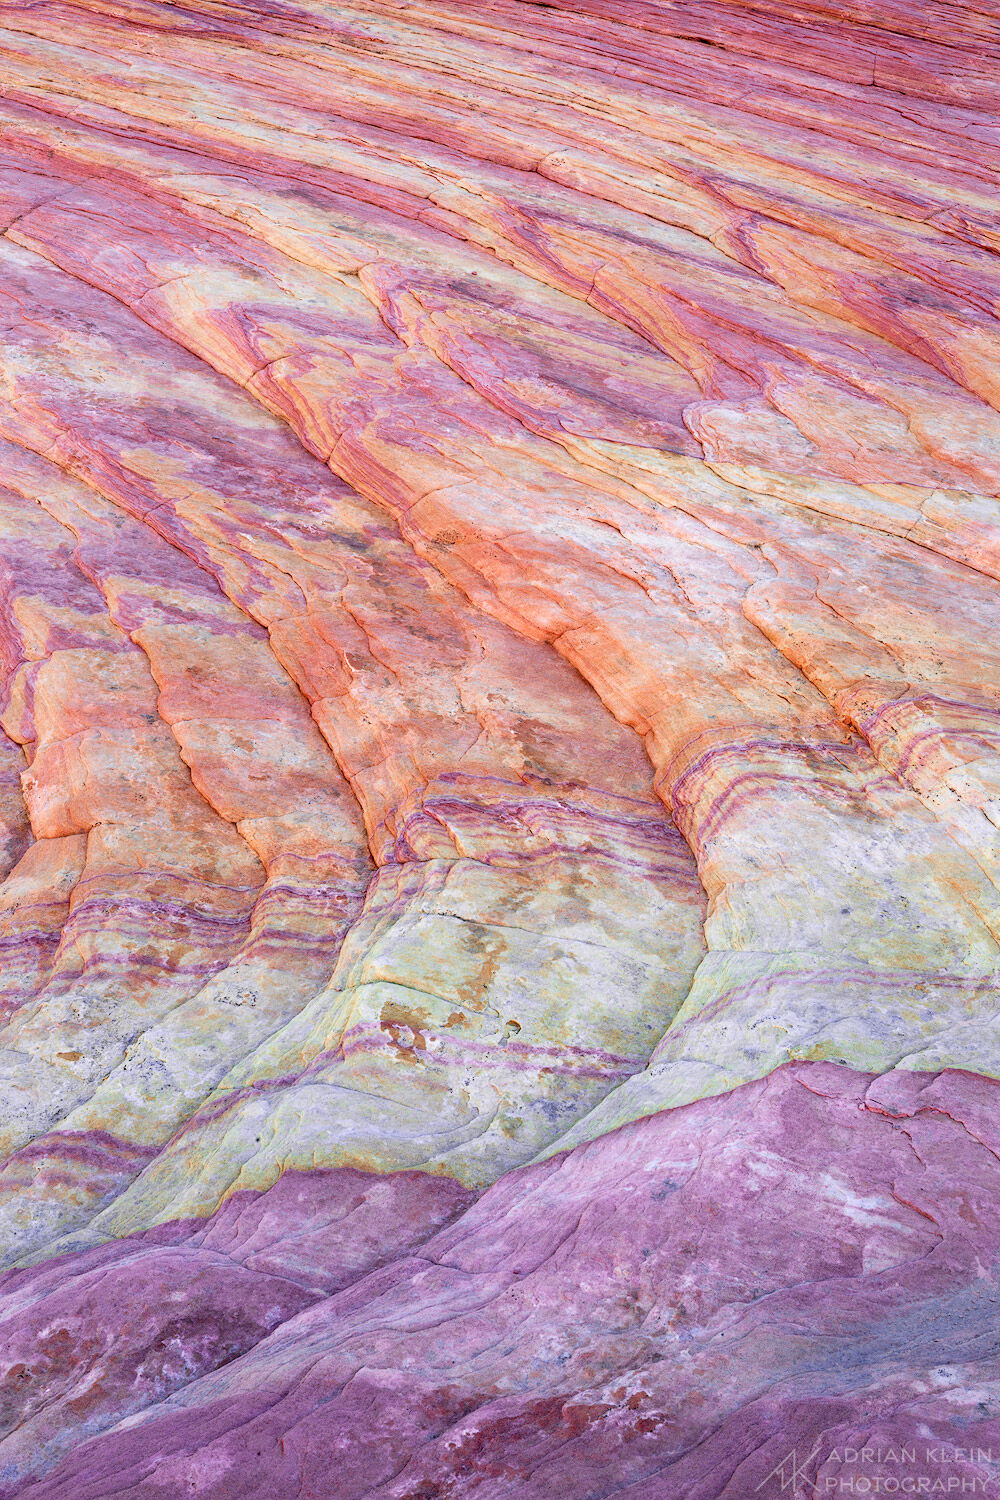 Walking on psychedelic sandstone in Nevada. It was a rainbow of colors like nothing I had ever seen before. Limited Edition of...